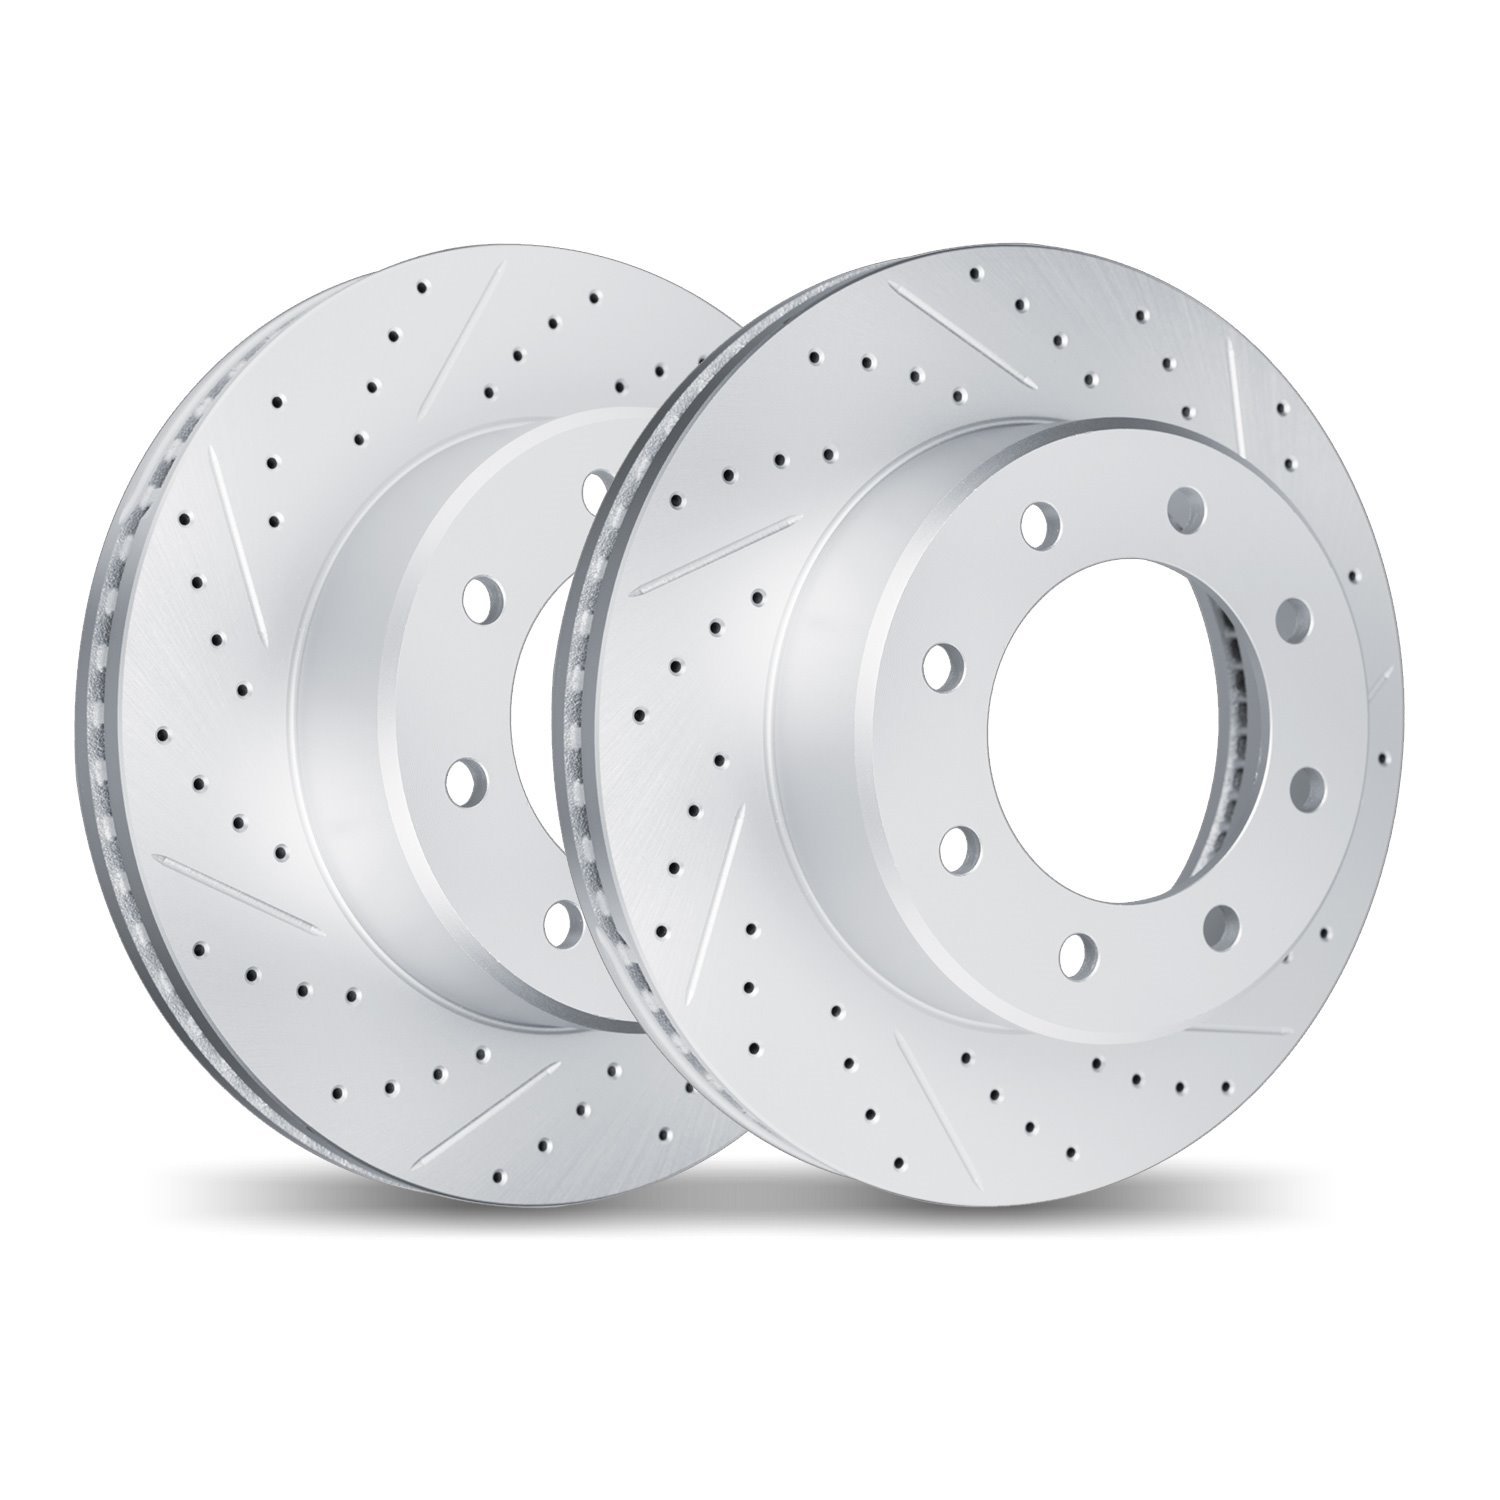 2002-54072 Geoperformance Drilled/Slotted Brake Rotors, 2005-2012 Ford/Lincoln/Mercury/Mazda, Position: Front